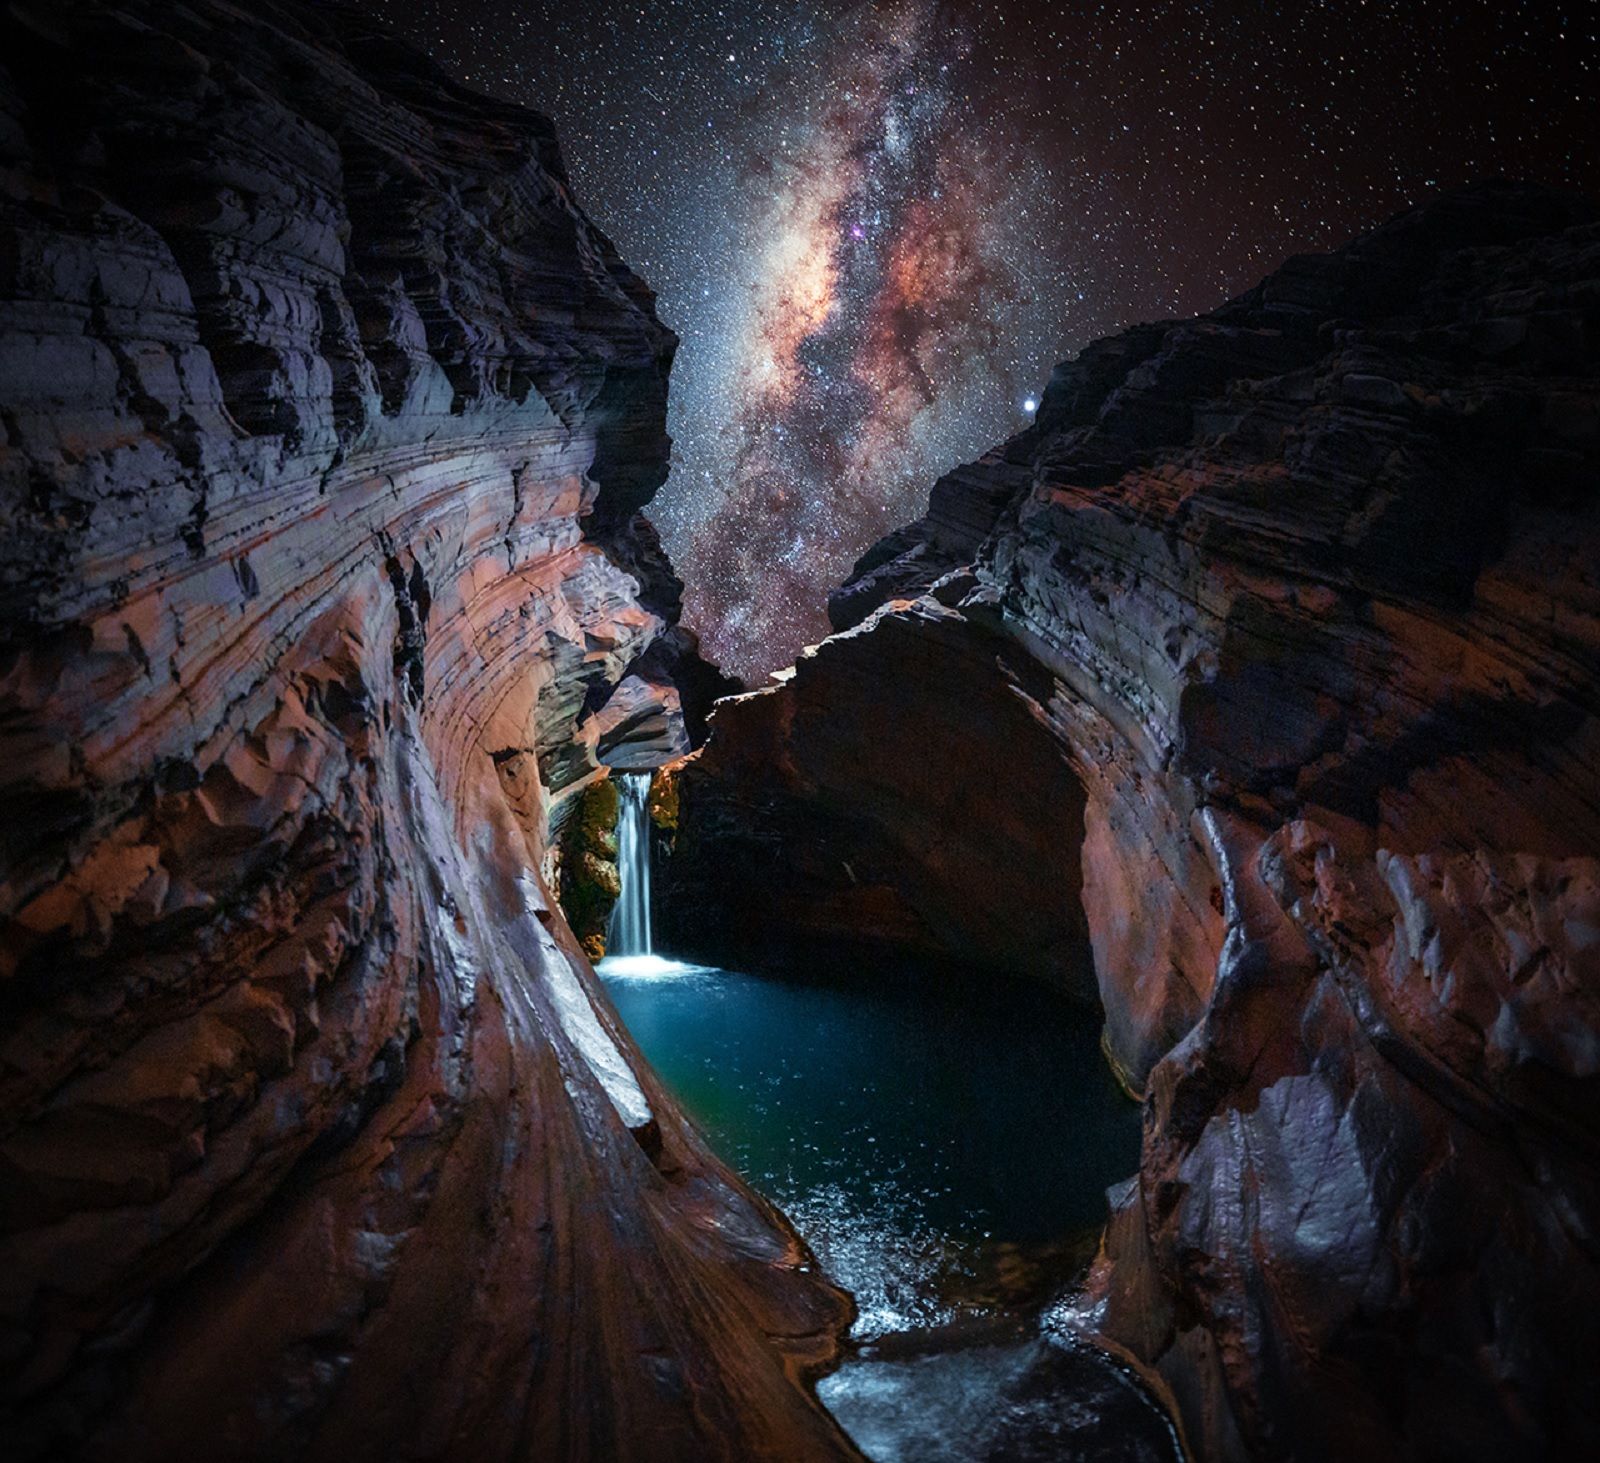 Check out these stunning photos from the 2020 Astronomy Photographer of the Year award photo 28